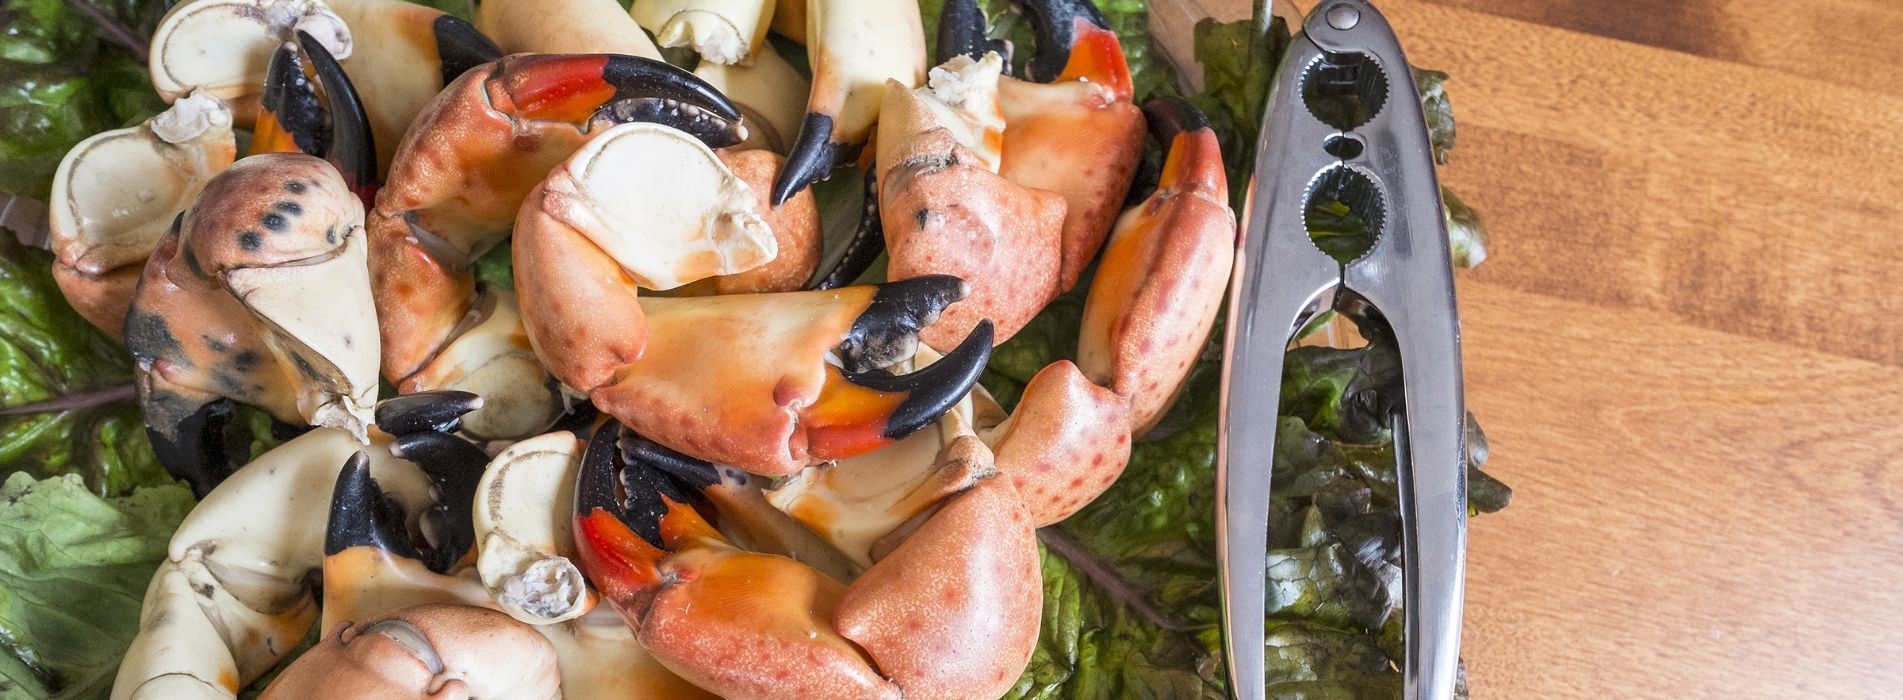 How To Tell If Your Stone Crab Claws Are Cooked Perfectly